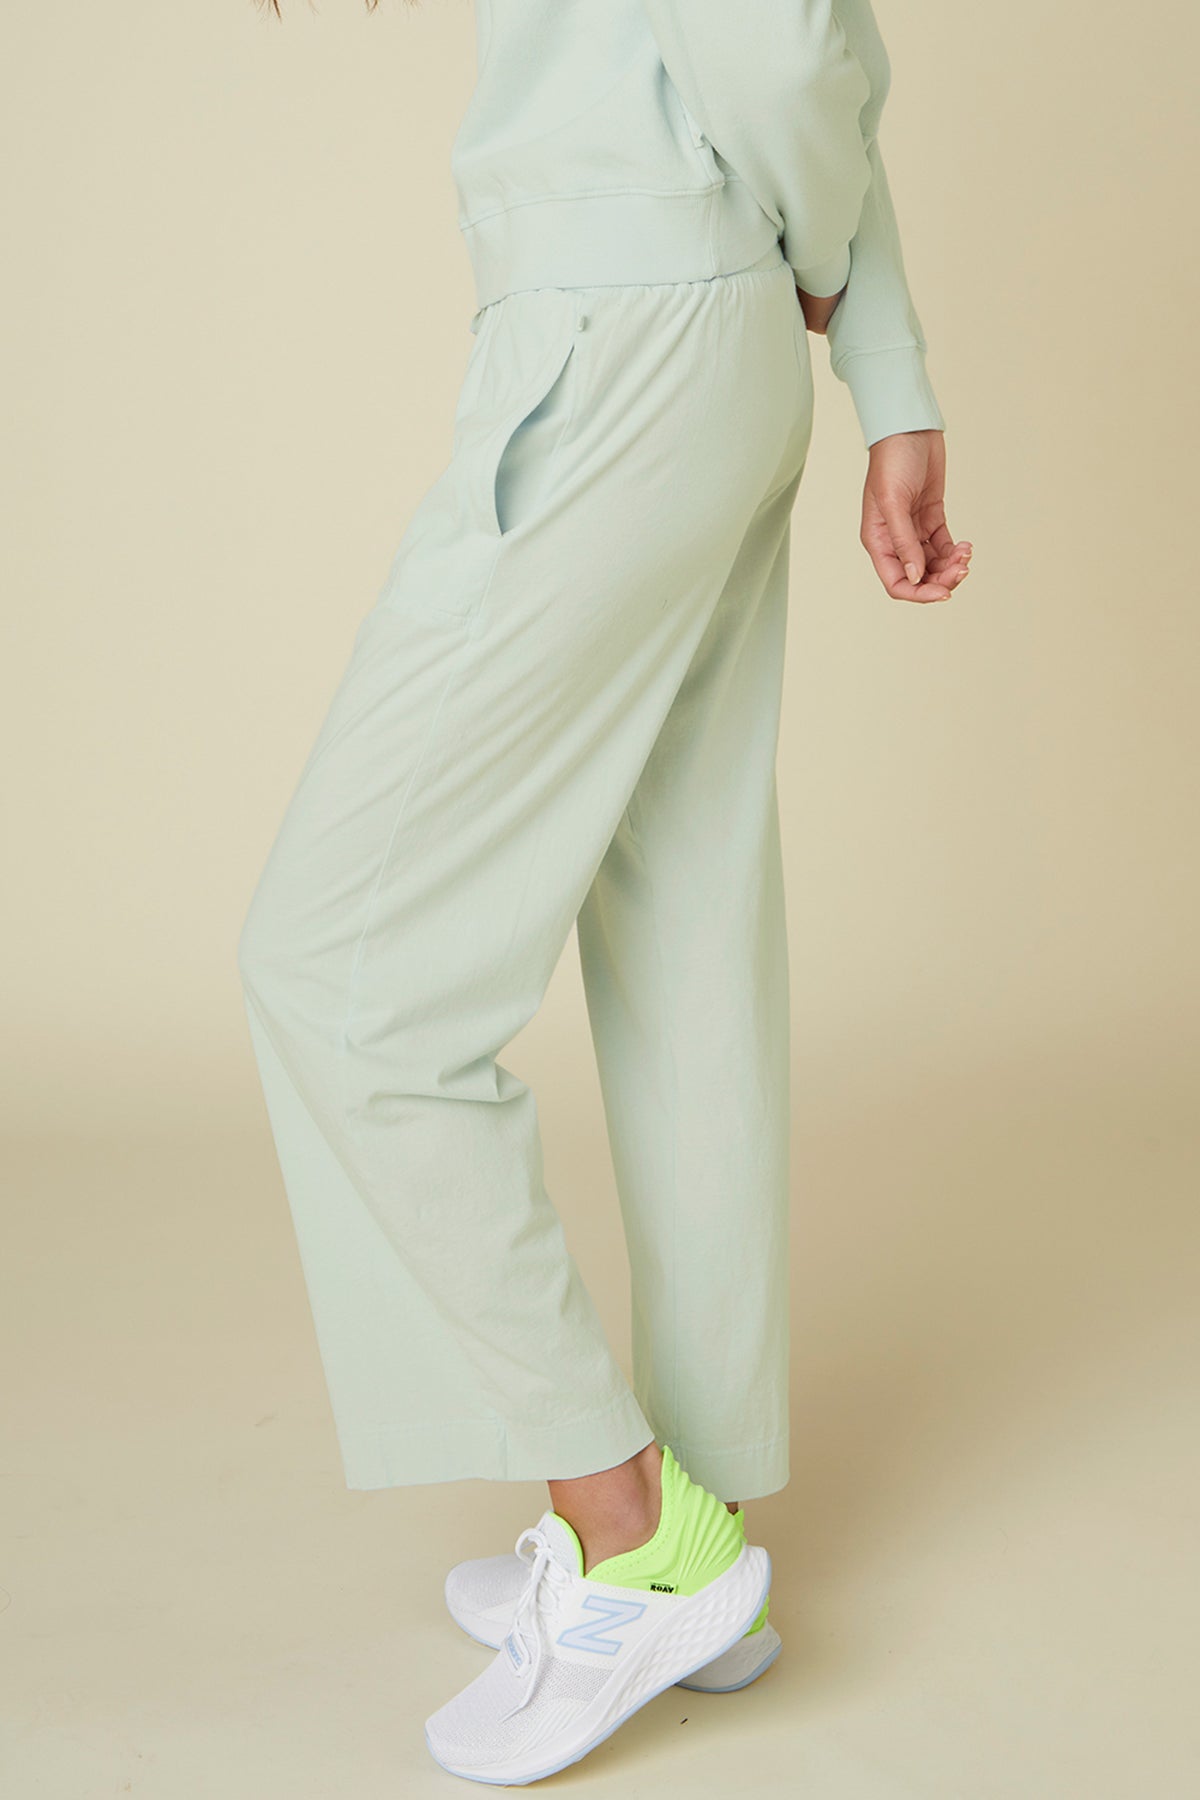 Pismo pant in pale mint green showing side and pocket.-24758804906177